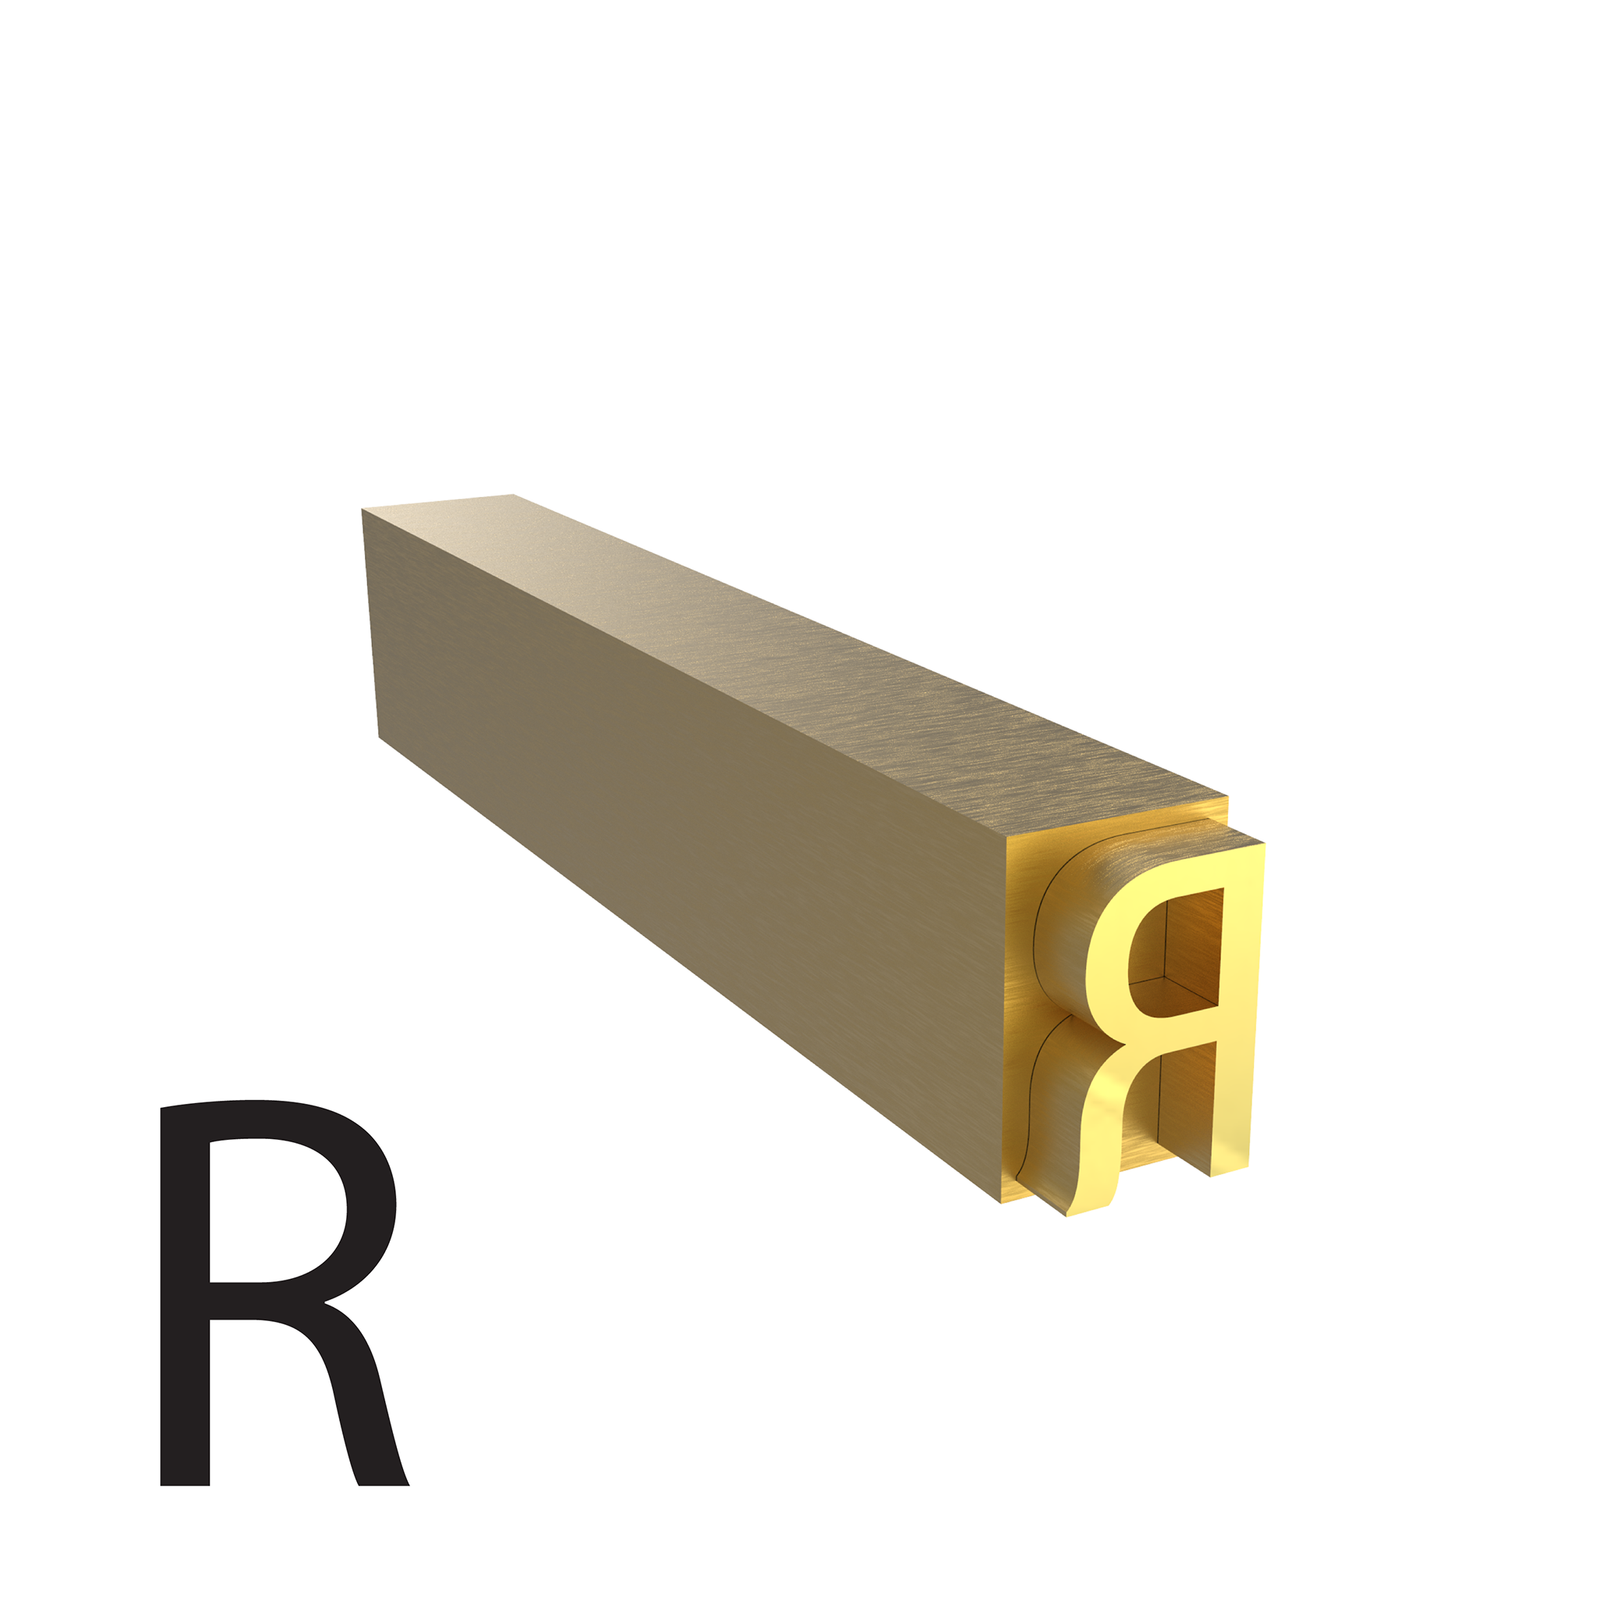 4mm hot stamp letter R type used for coders and printers